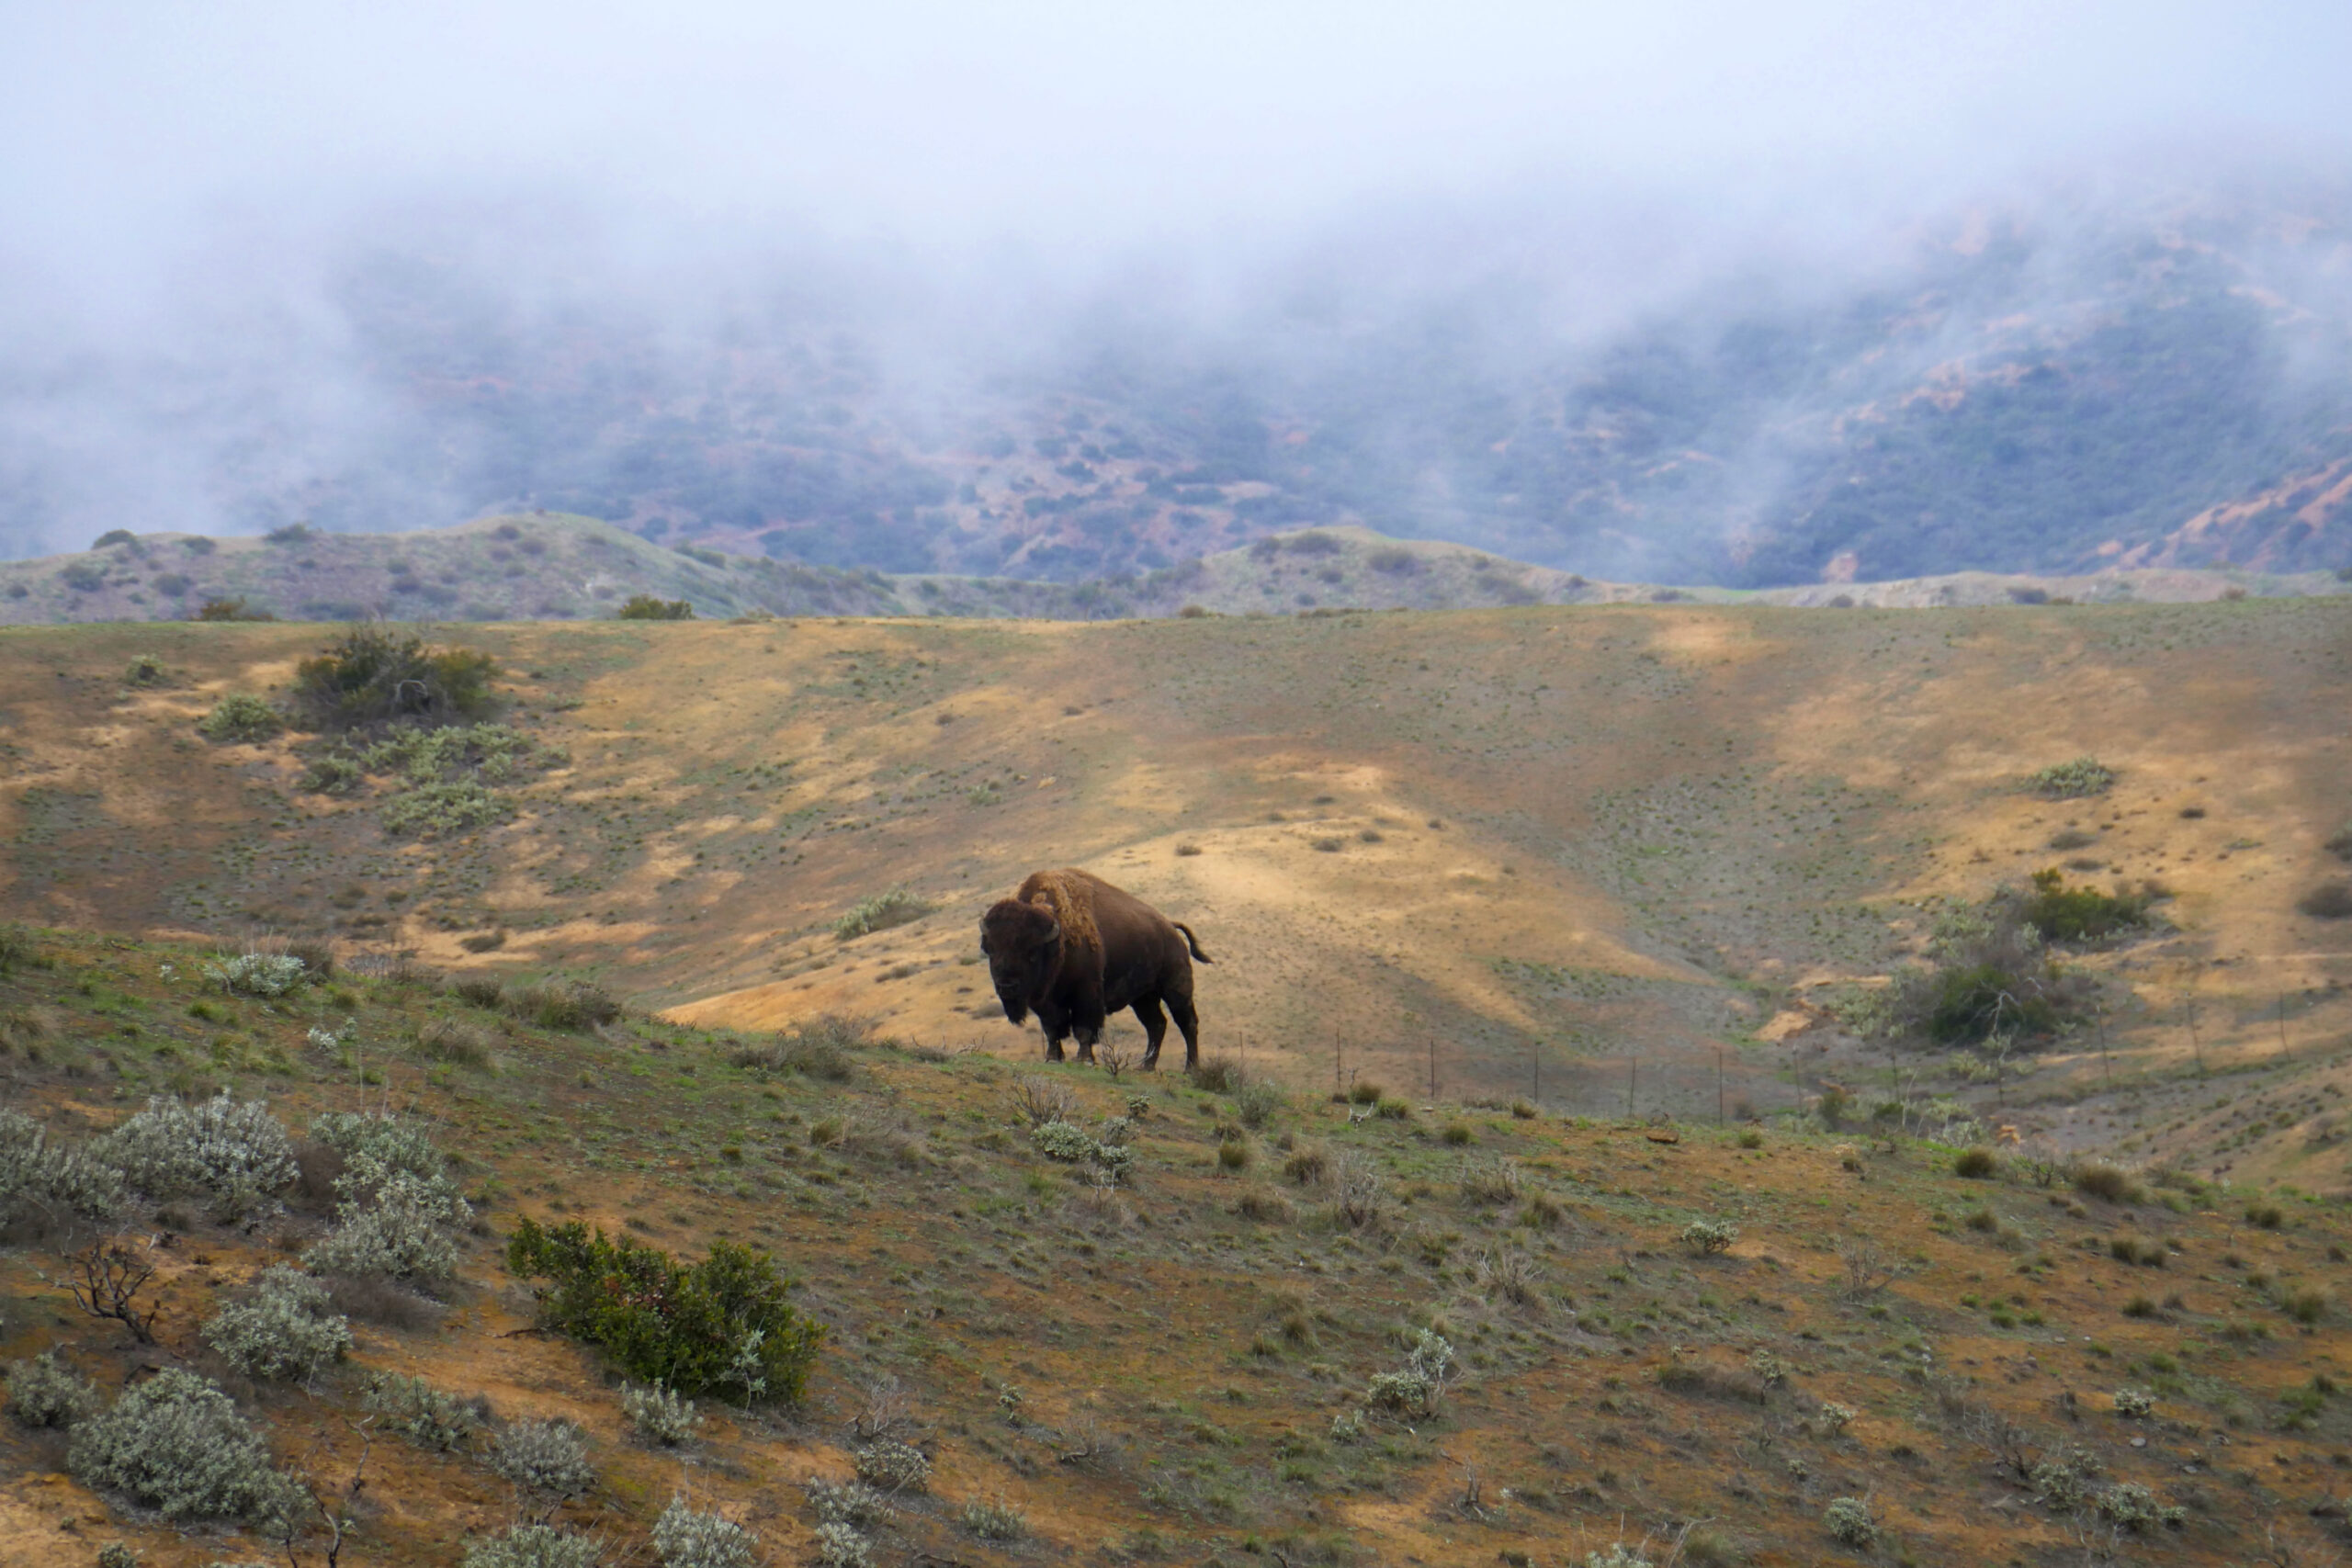 In 1924, a Hollywood film crew brought fourteen bison to Catalina Island, California to shoot a movie.